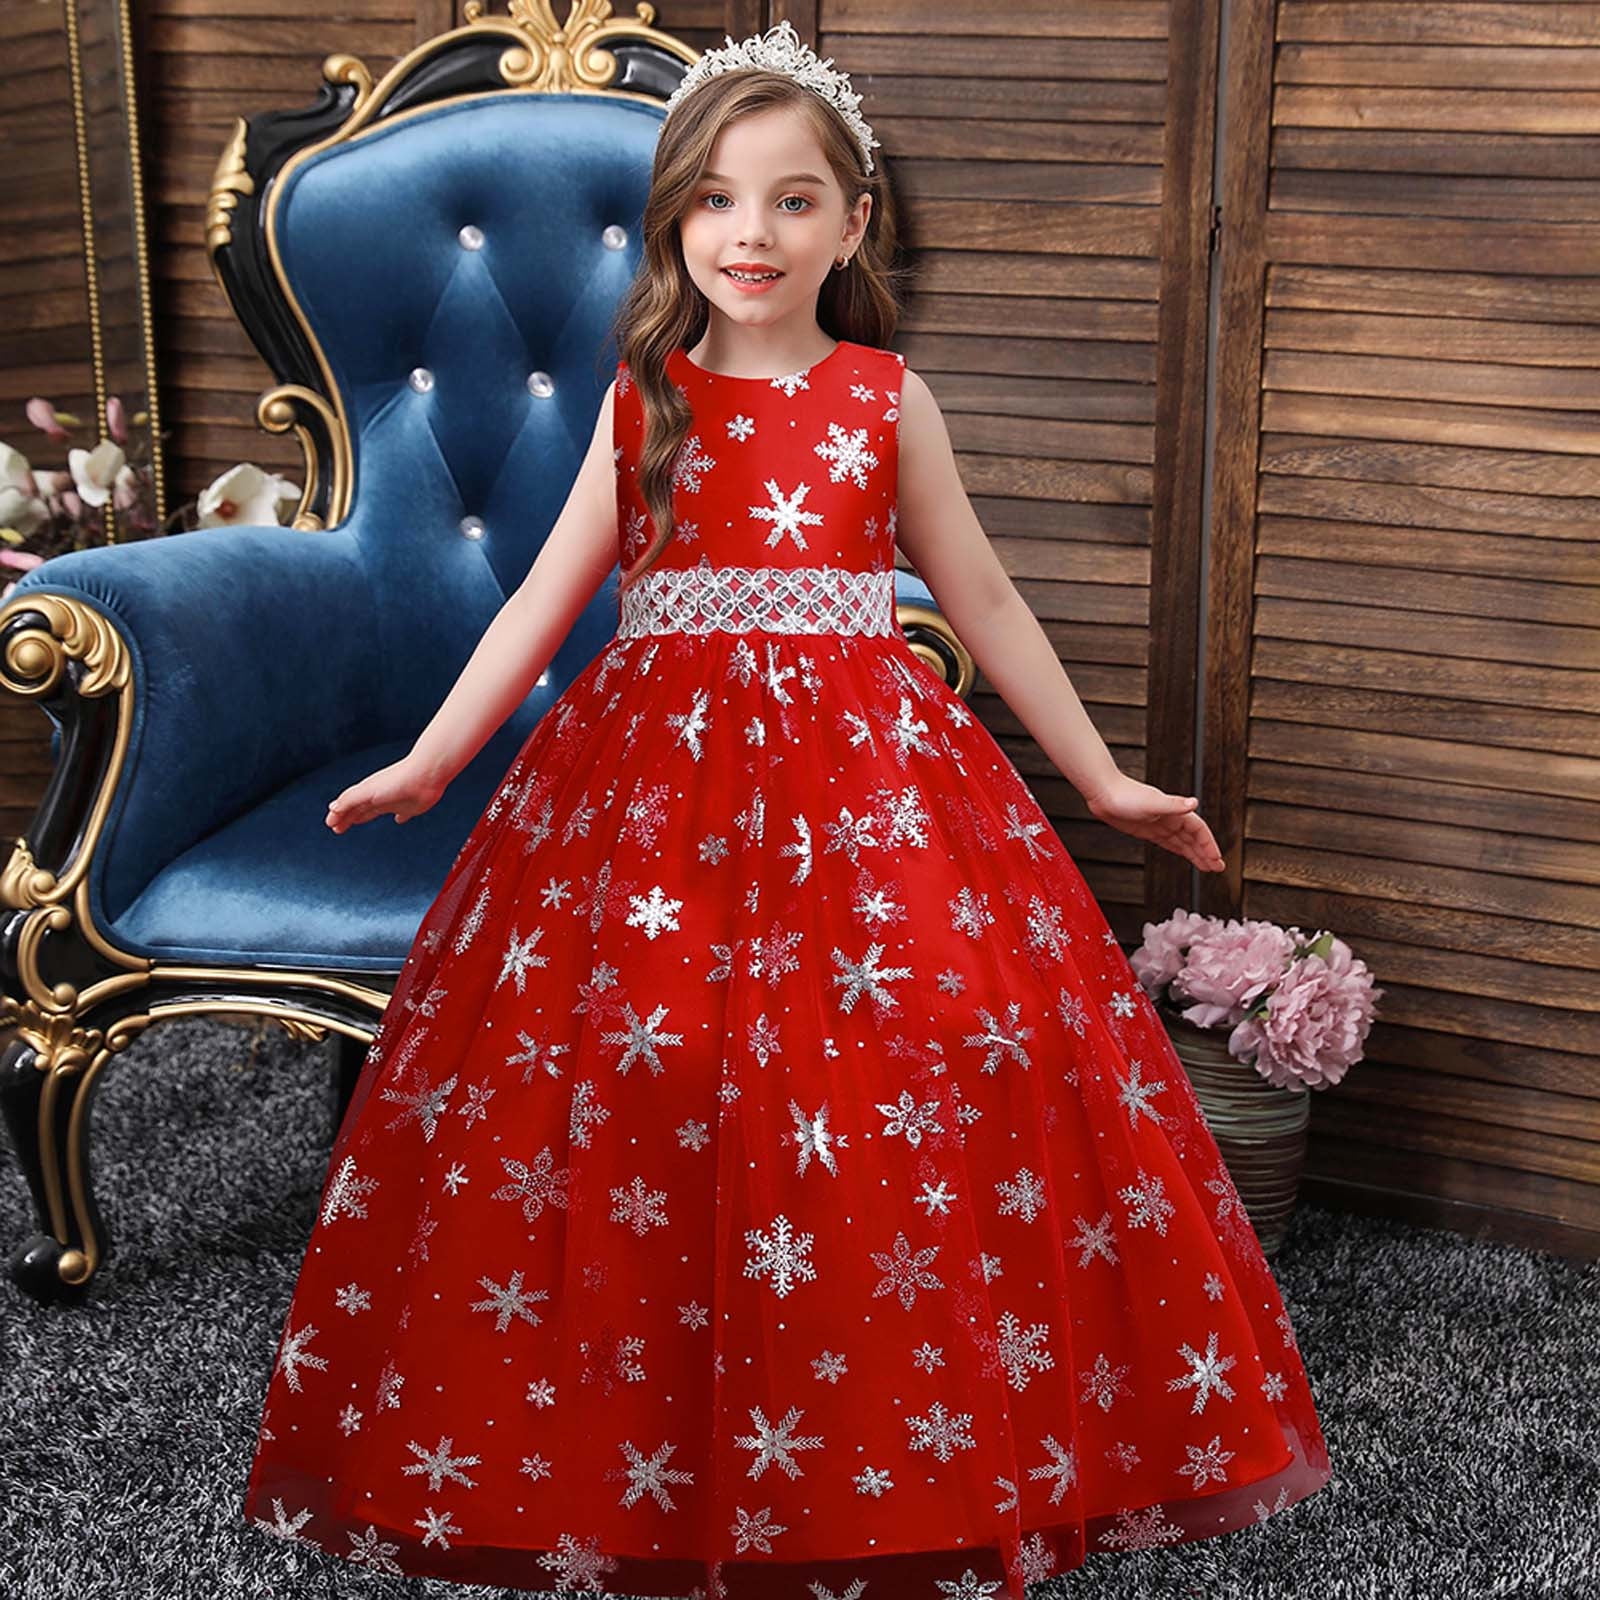 royal red kids gown | Ball gowns prom, Red ball dress, Ball gowns